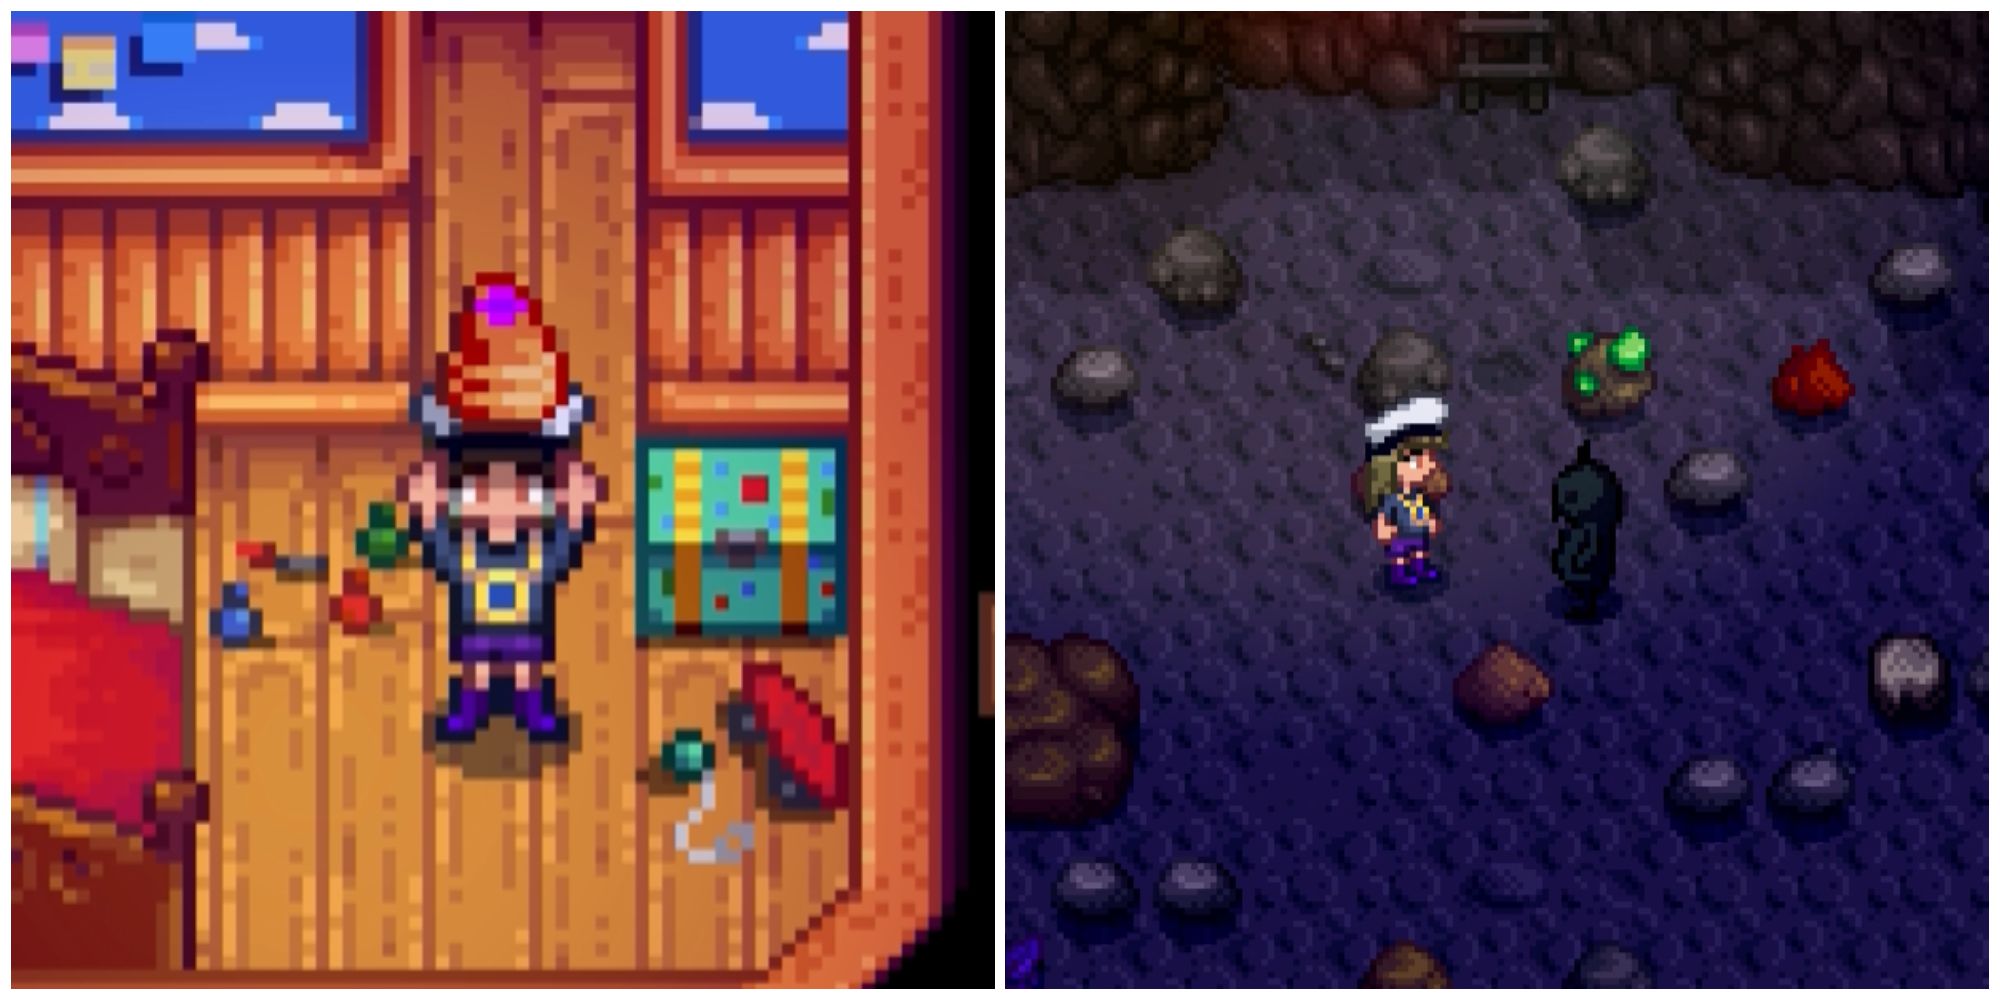 Split image of a character holding a Strange Bun and a character in front of a Shadow Brute enemy in Stardew Valley